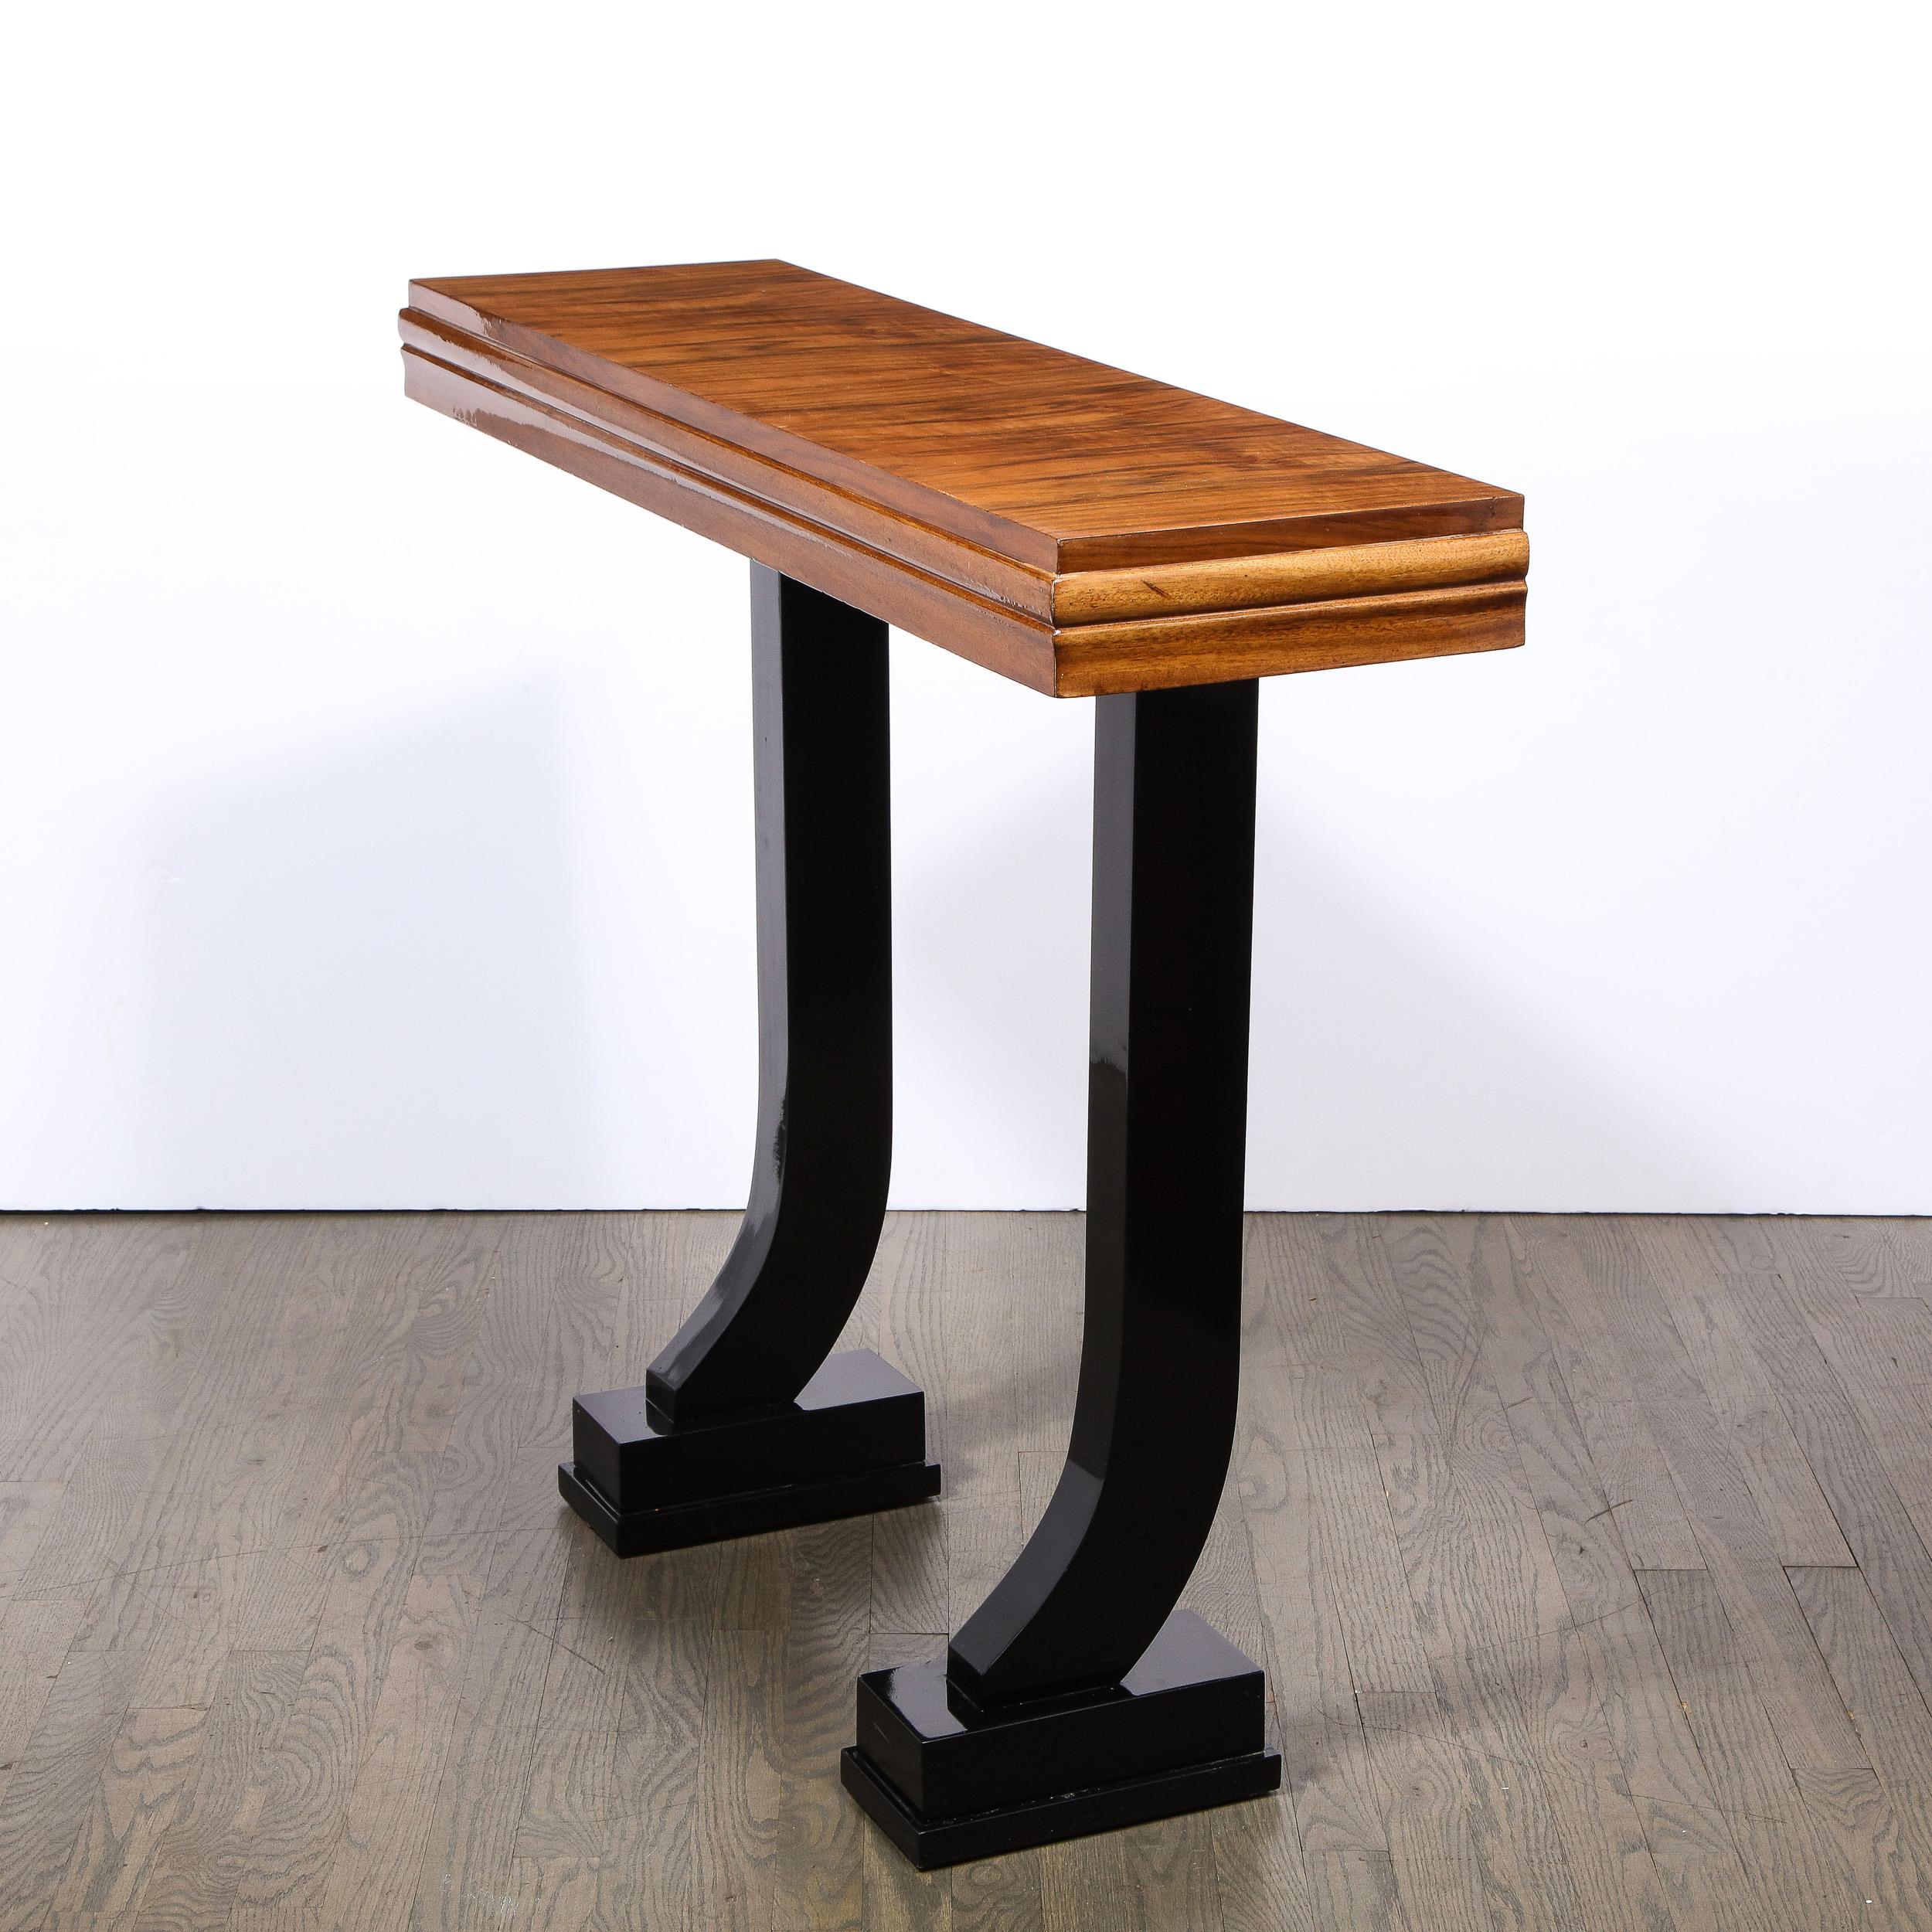 American Art Deco Machine Age Bookmatched Walnut & Black Lacquer Console Table